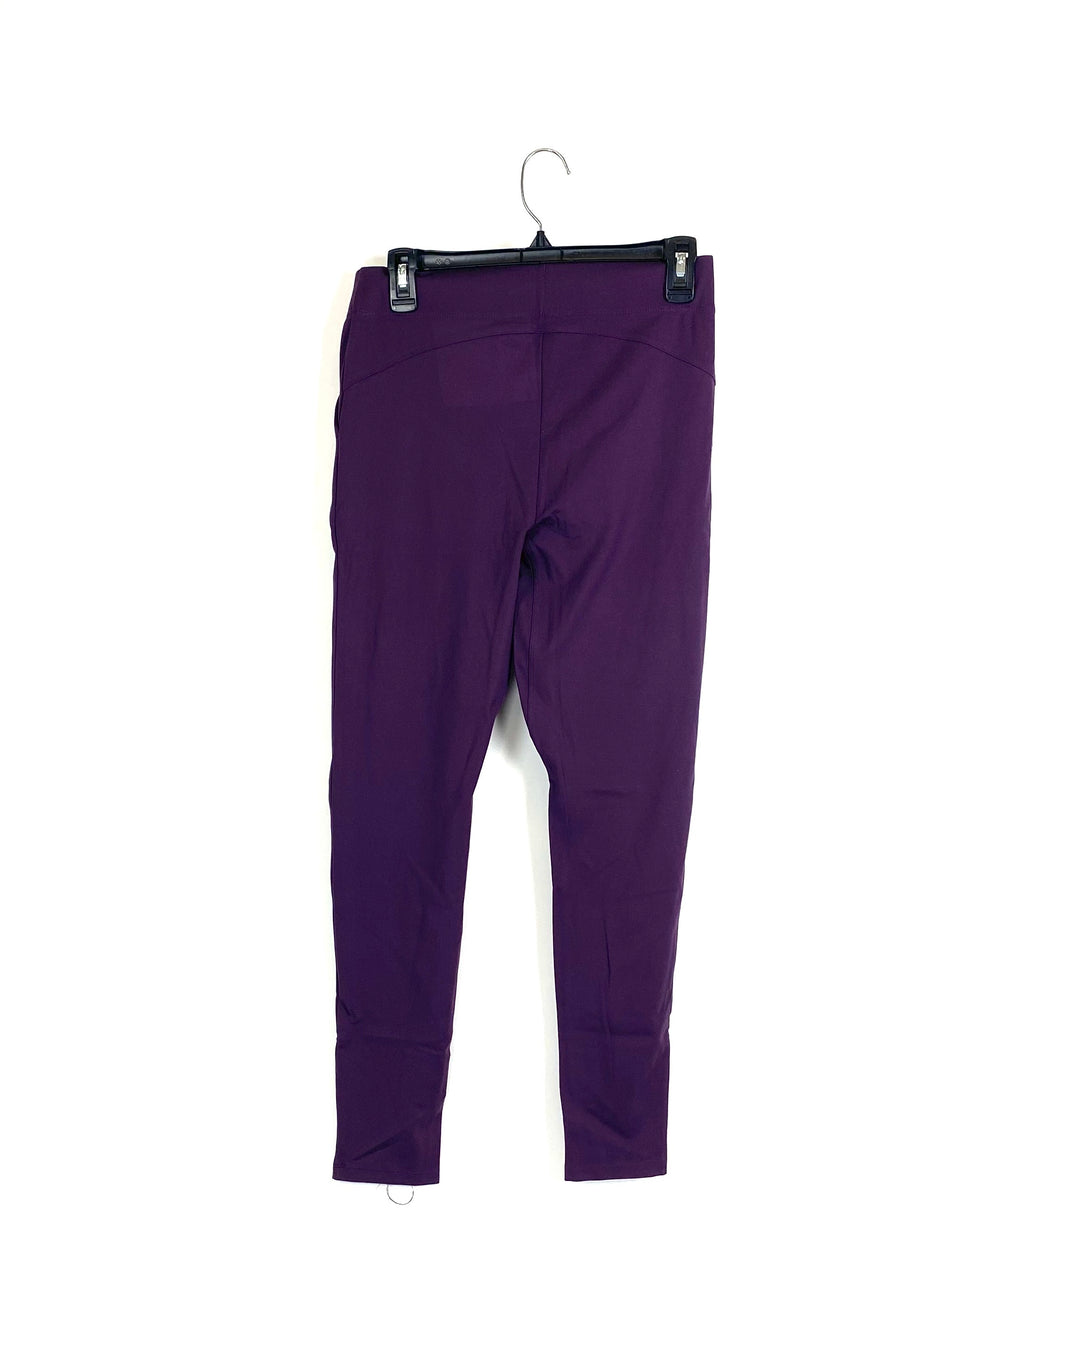 Purple Leggings with Pockets - Extra Small and Small